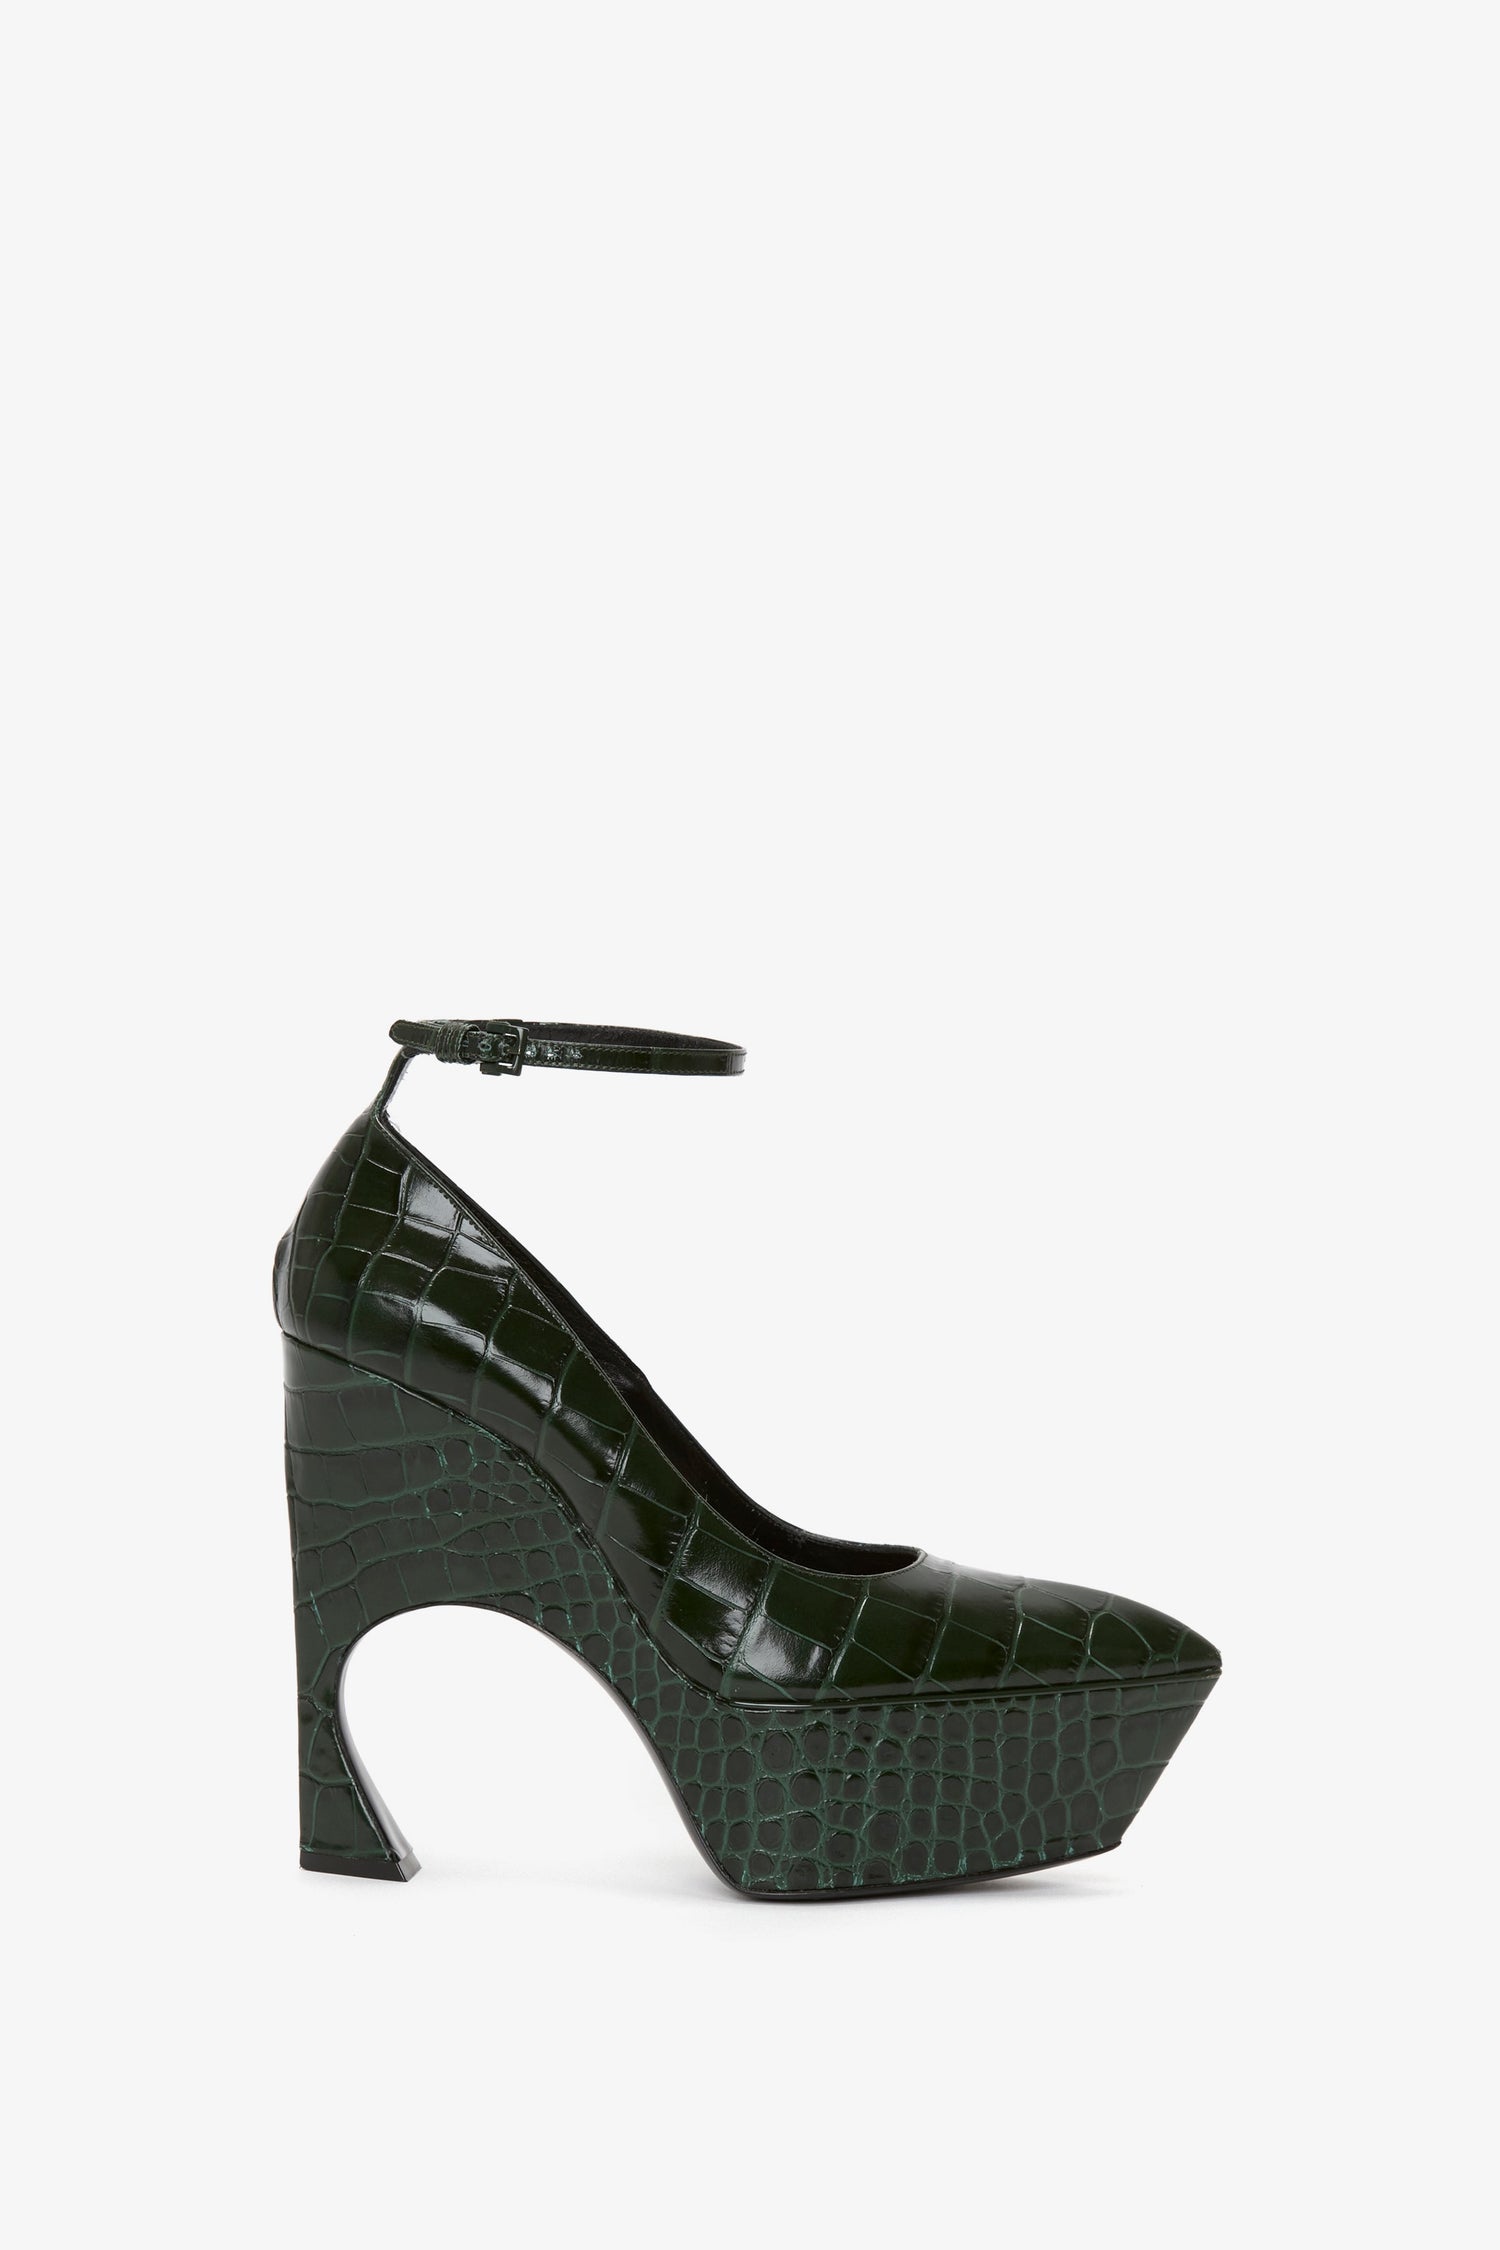 The Ankle Strap Wedge Pump In Dark Green Croc-Effect Leather by Victoria Beckham is a dark green, embossed croc leather pump featuring a chunky, sculptural heel and an adjustable ankle strap.